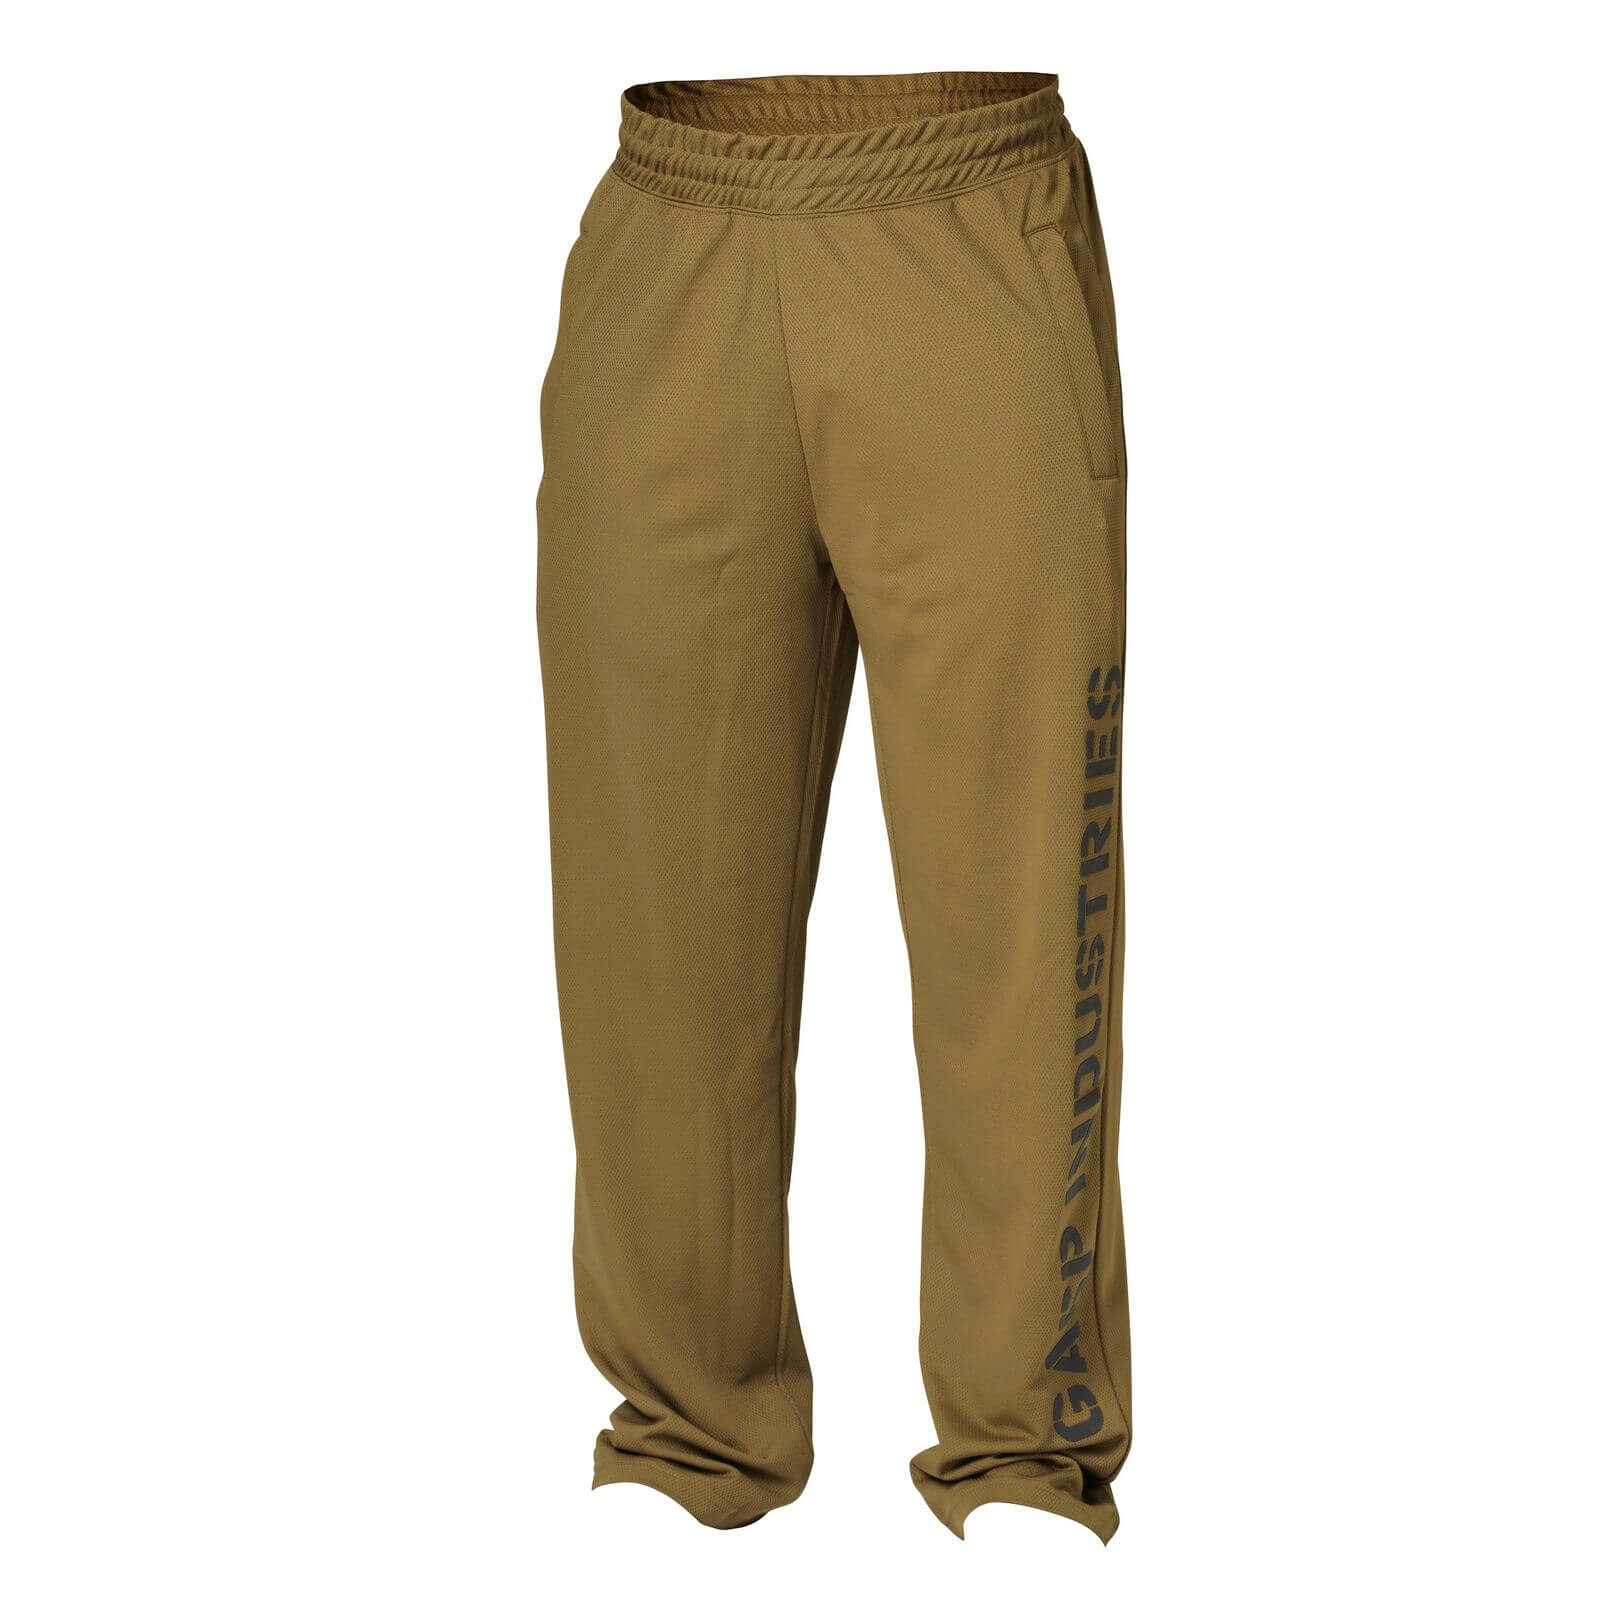 Essential Mesh Pant, military olive, GASP